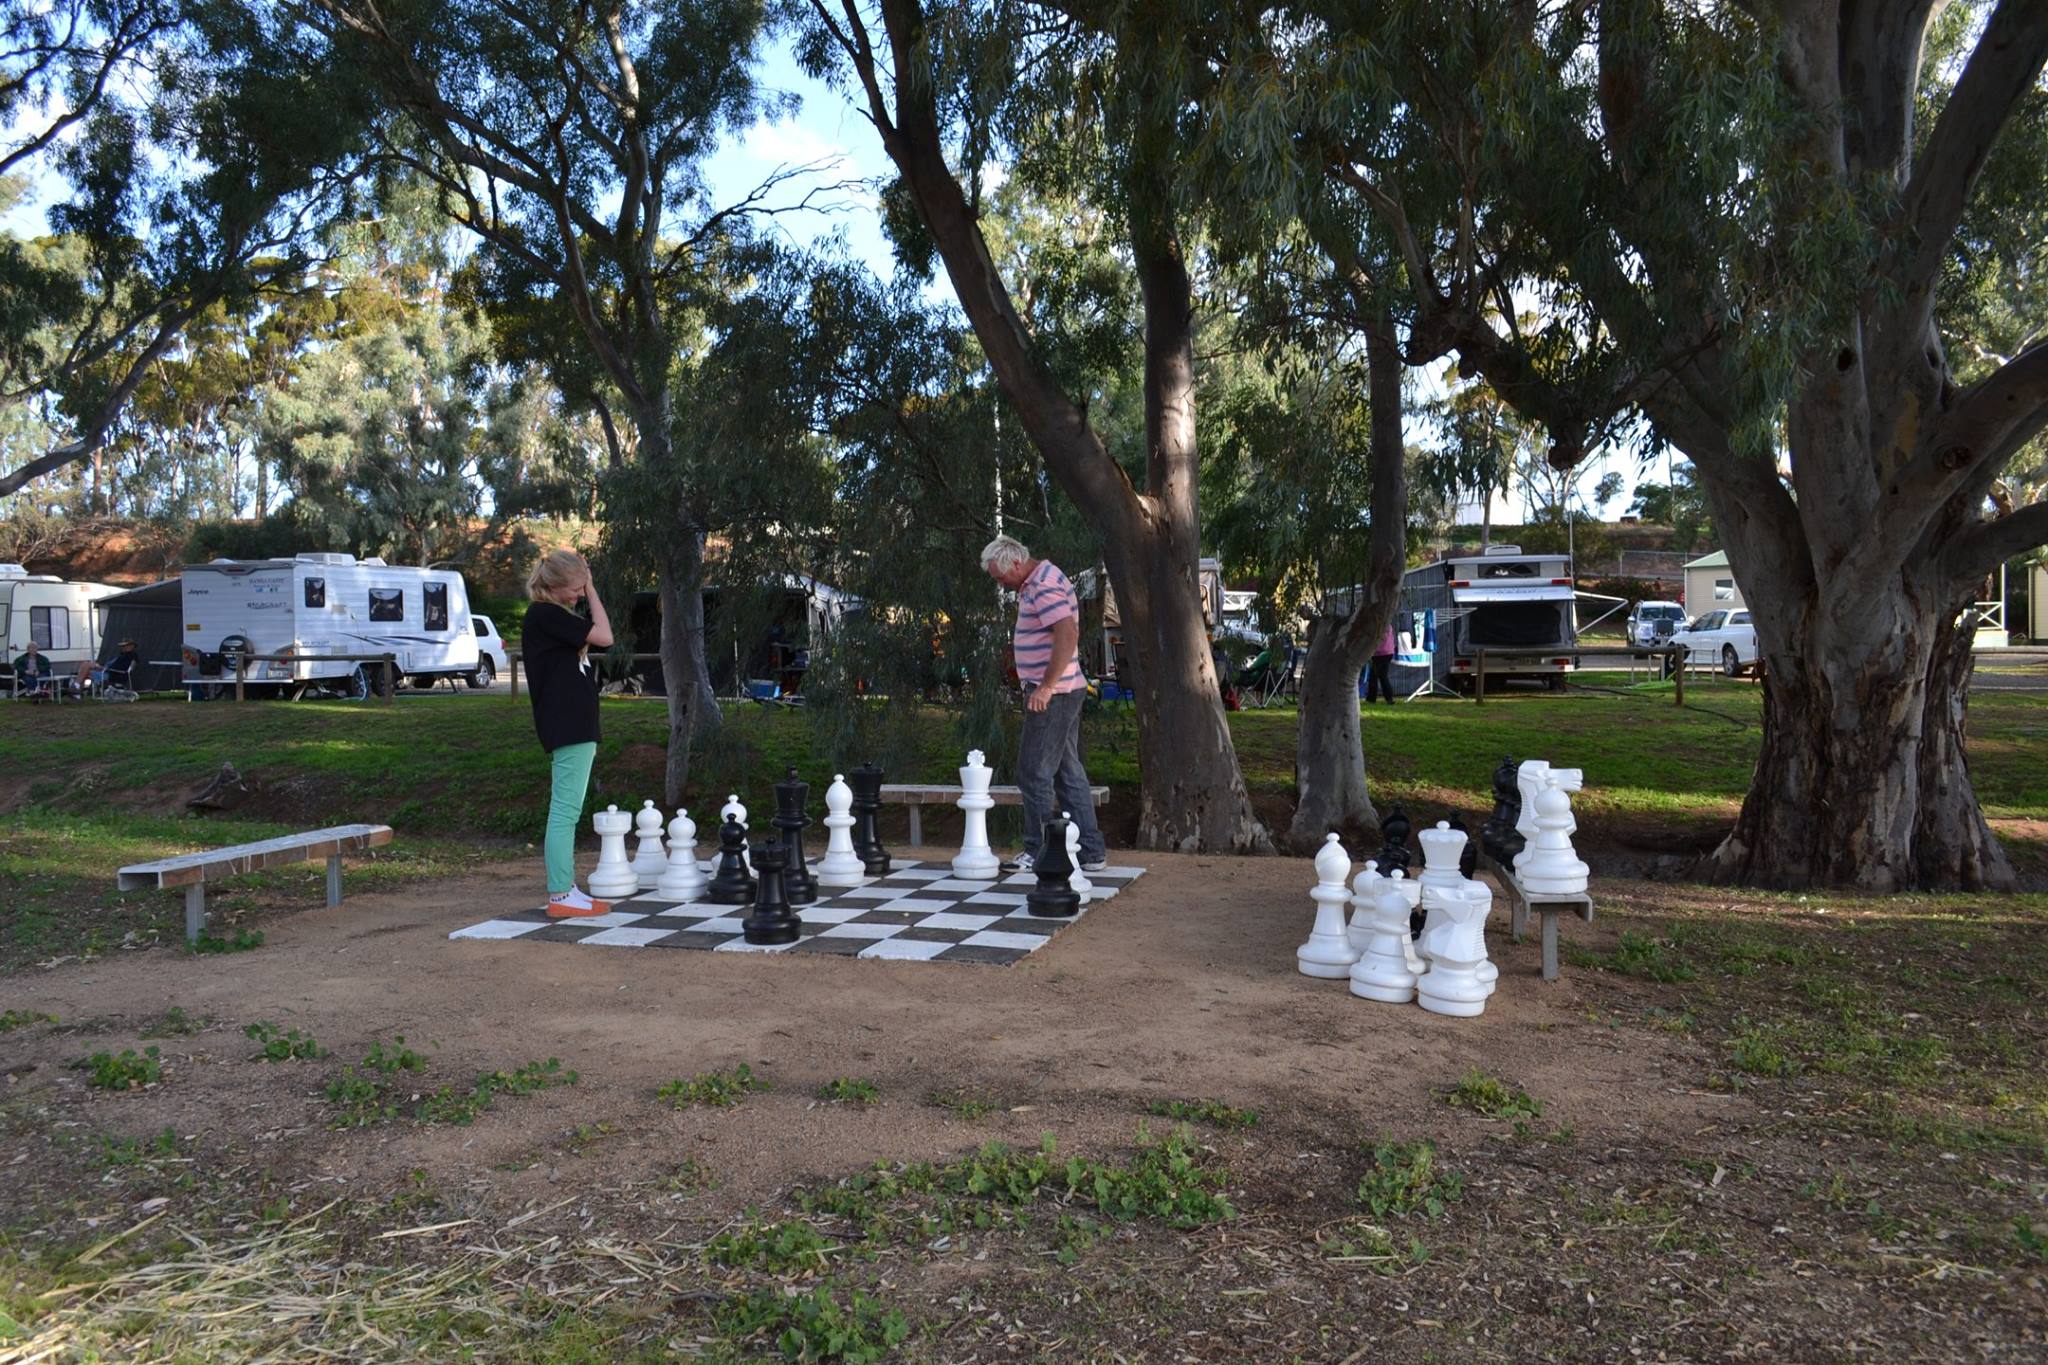 People playing a giant game of chess